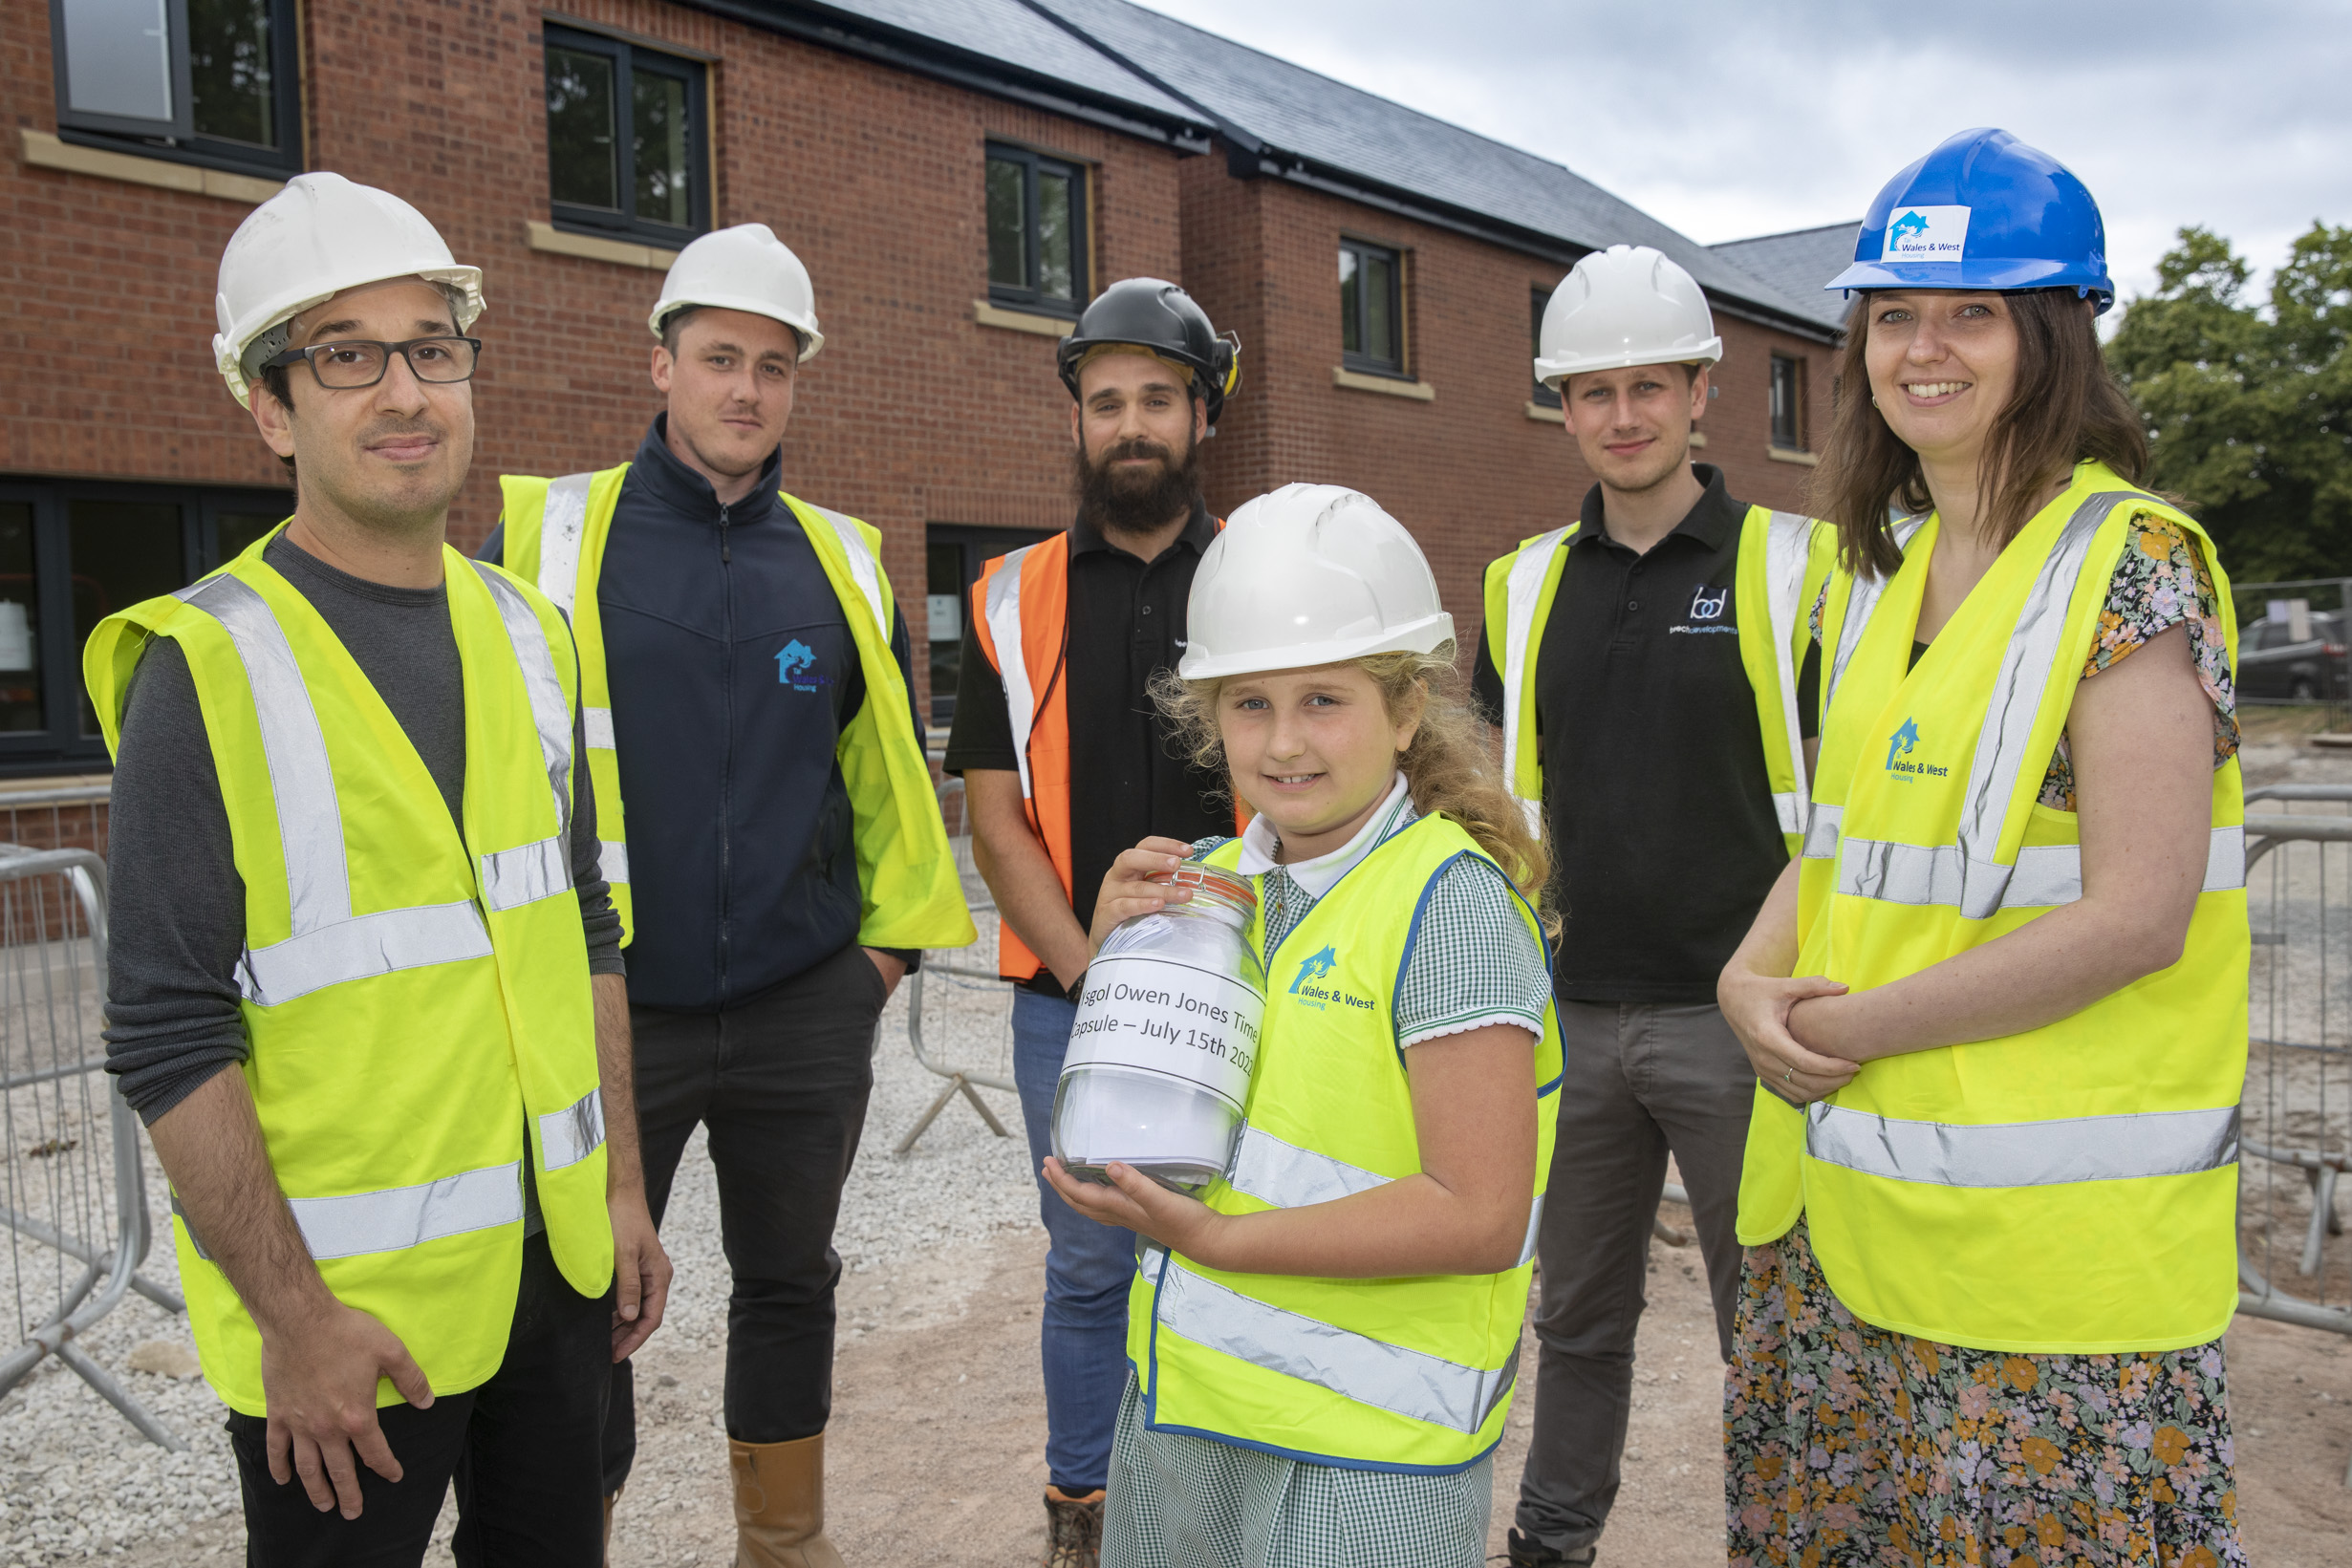 WWH staff with students from Northop school burying a time capsule on a construction site